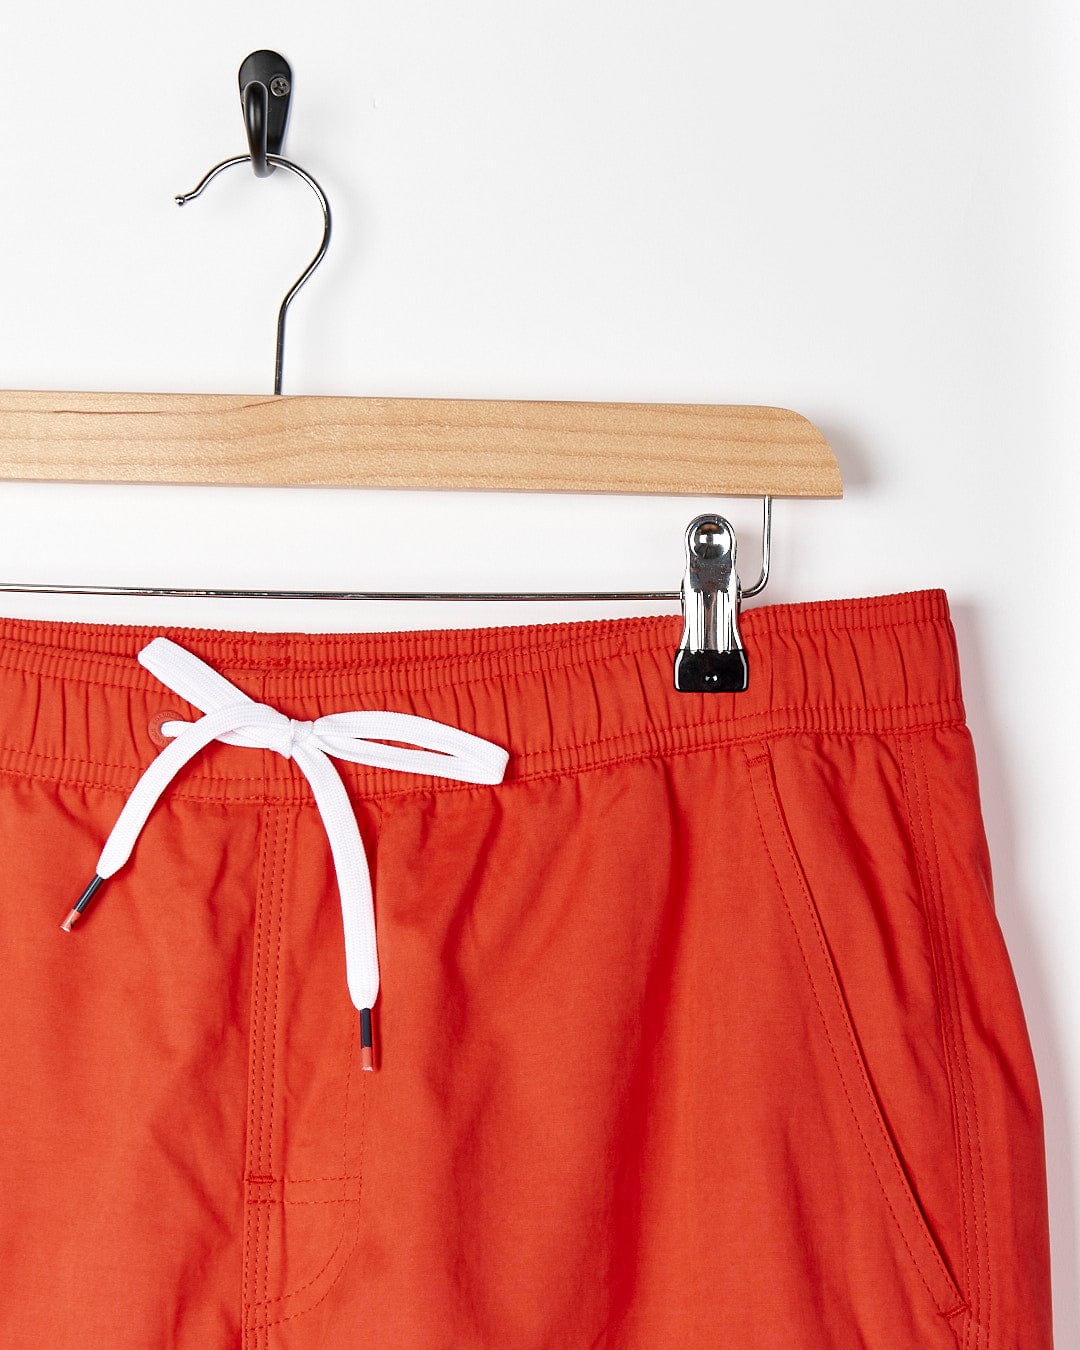 A pair of Red Lee - Mens Sueded Volley Swimshorts hanging on a hanger.